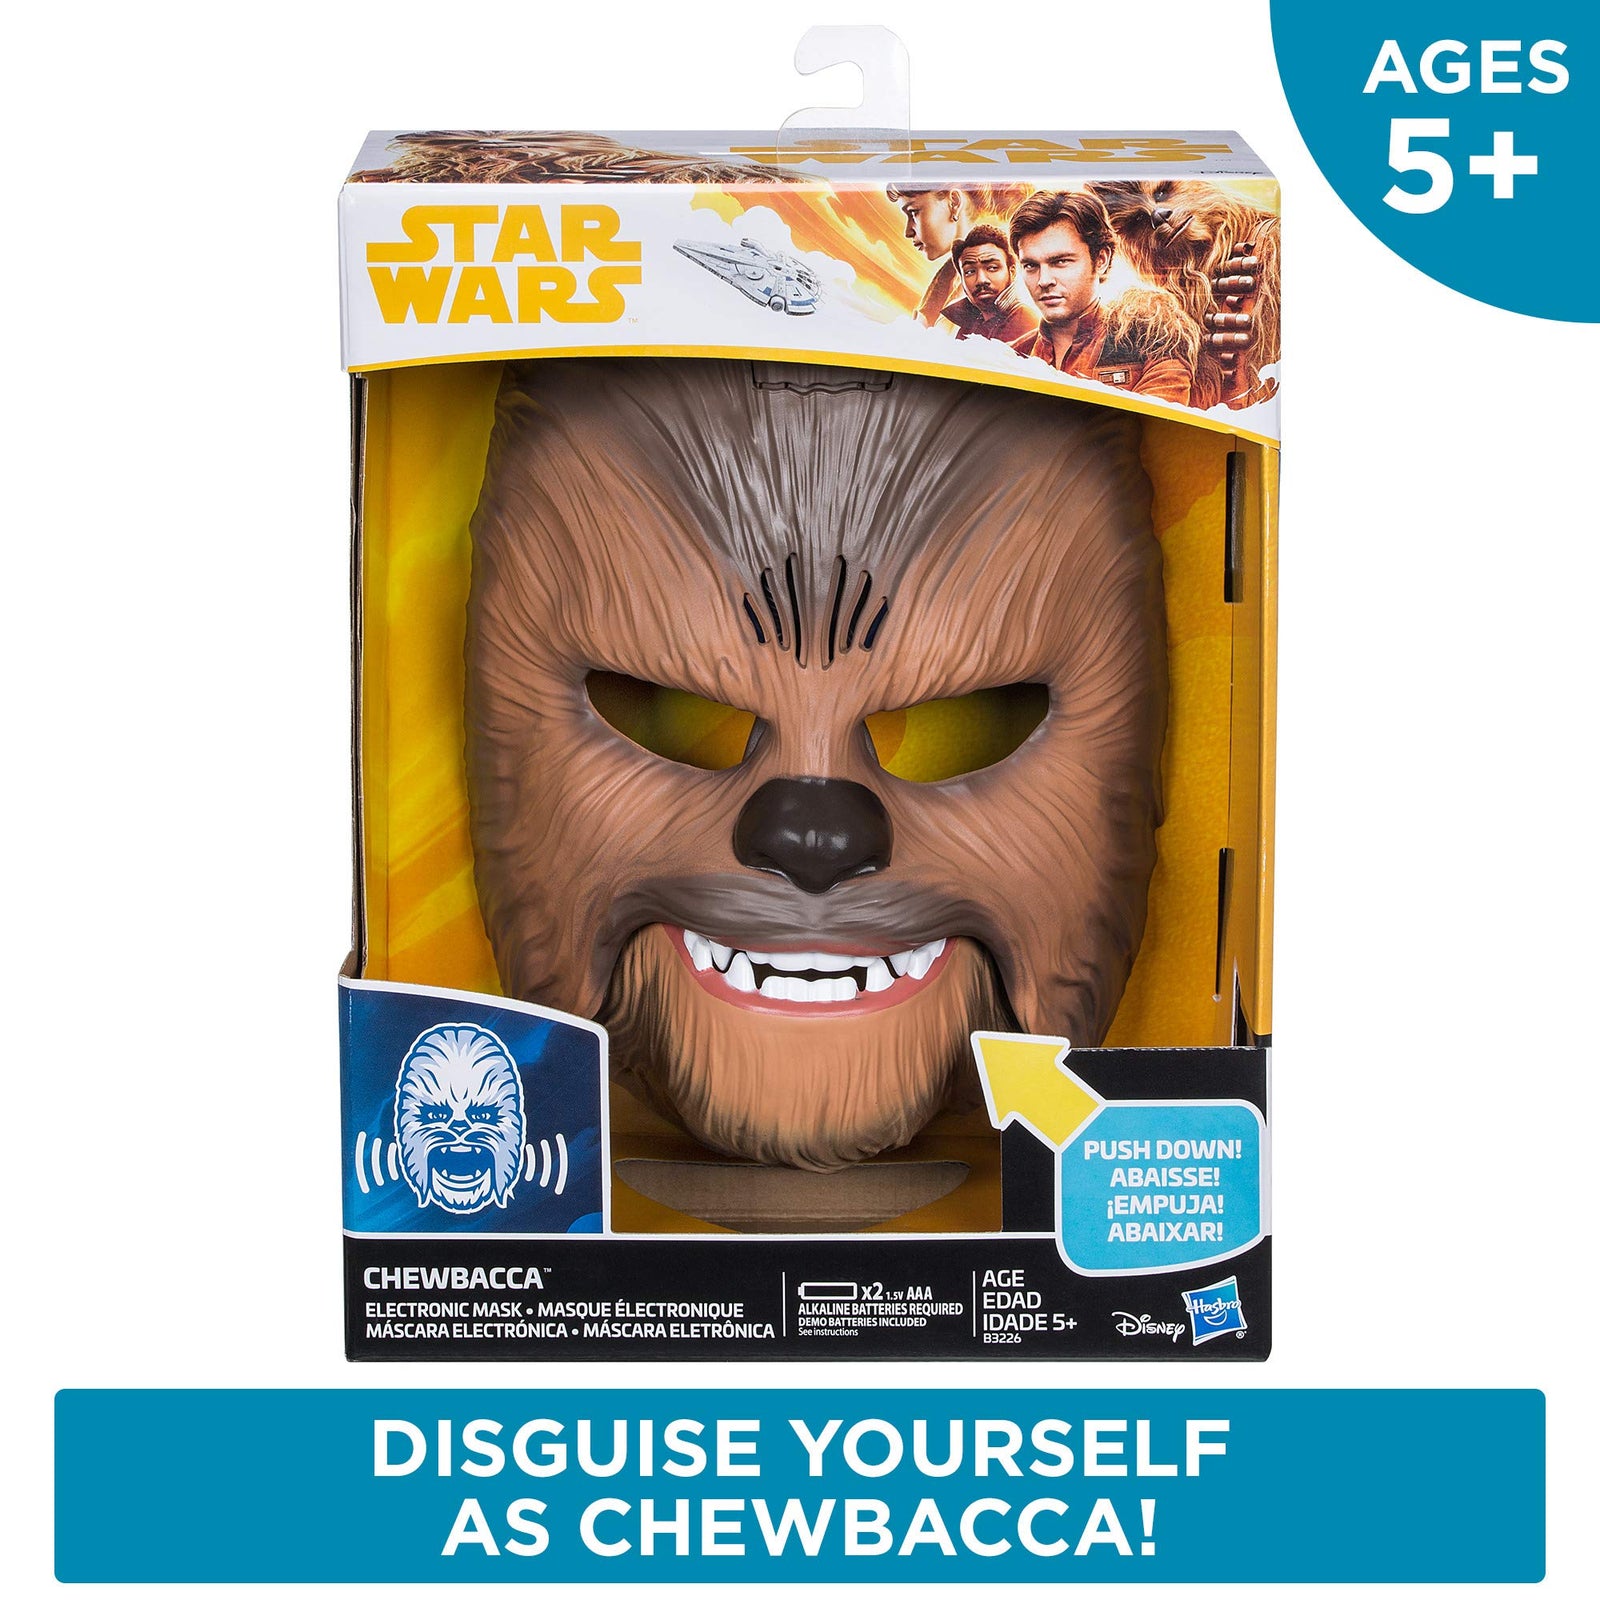 Star Wars Movie Roaring Chewbacca Wookiee Sounds Mask, Funny GRAAAAWR Noises, Sound Effects, Ages 5 and up, Brown (Amazon Exclusive)